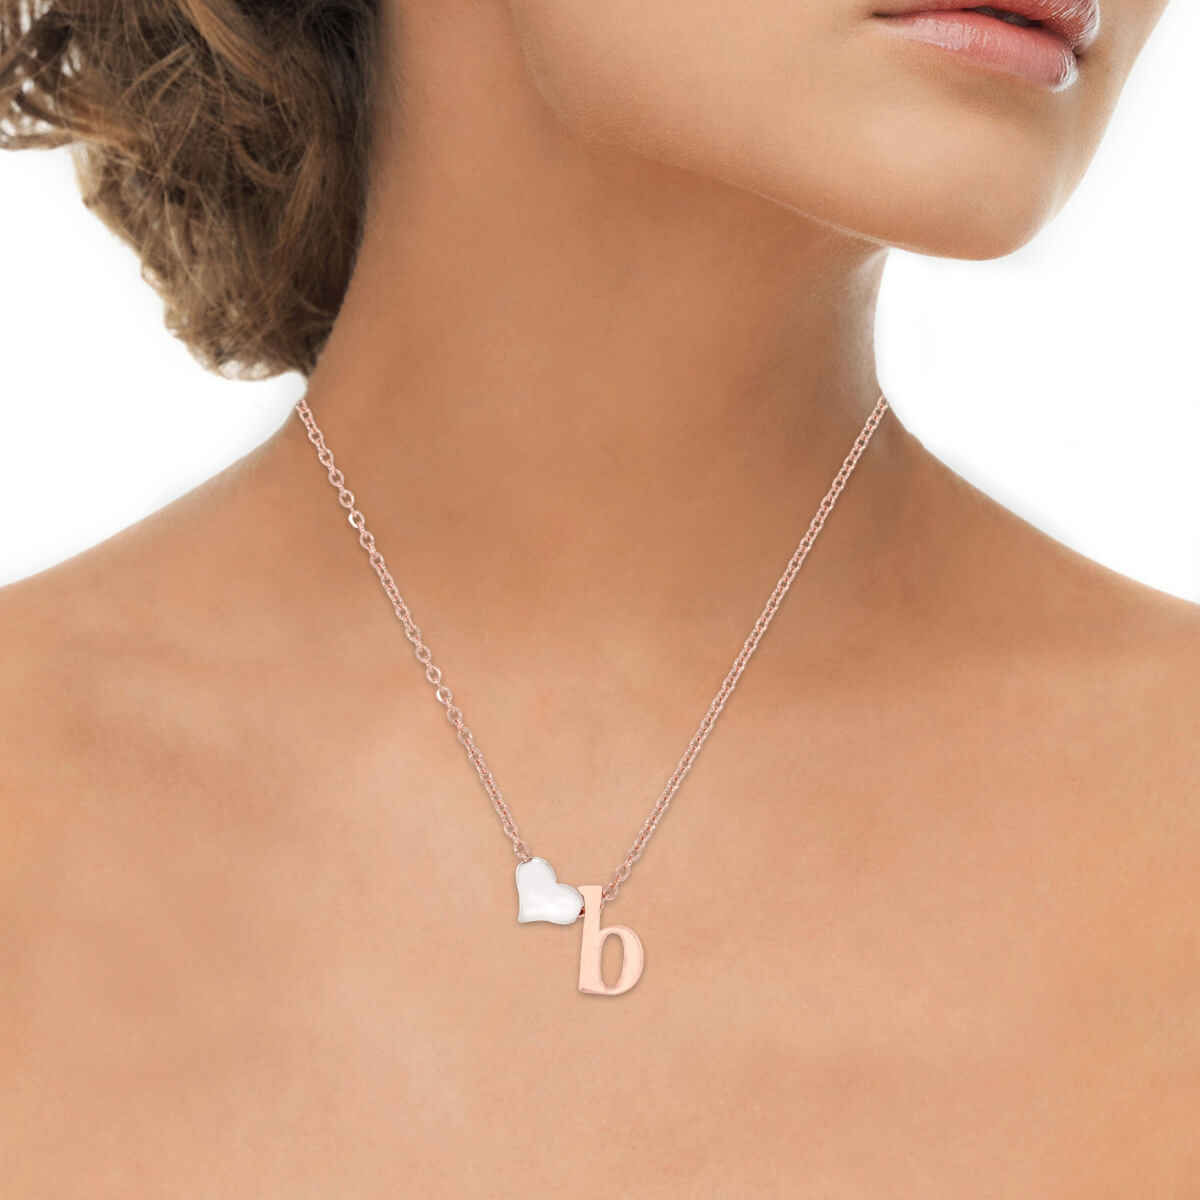 Sterling Silver "B" Initial Necklace